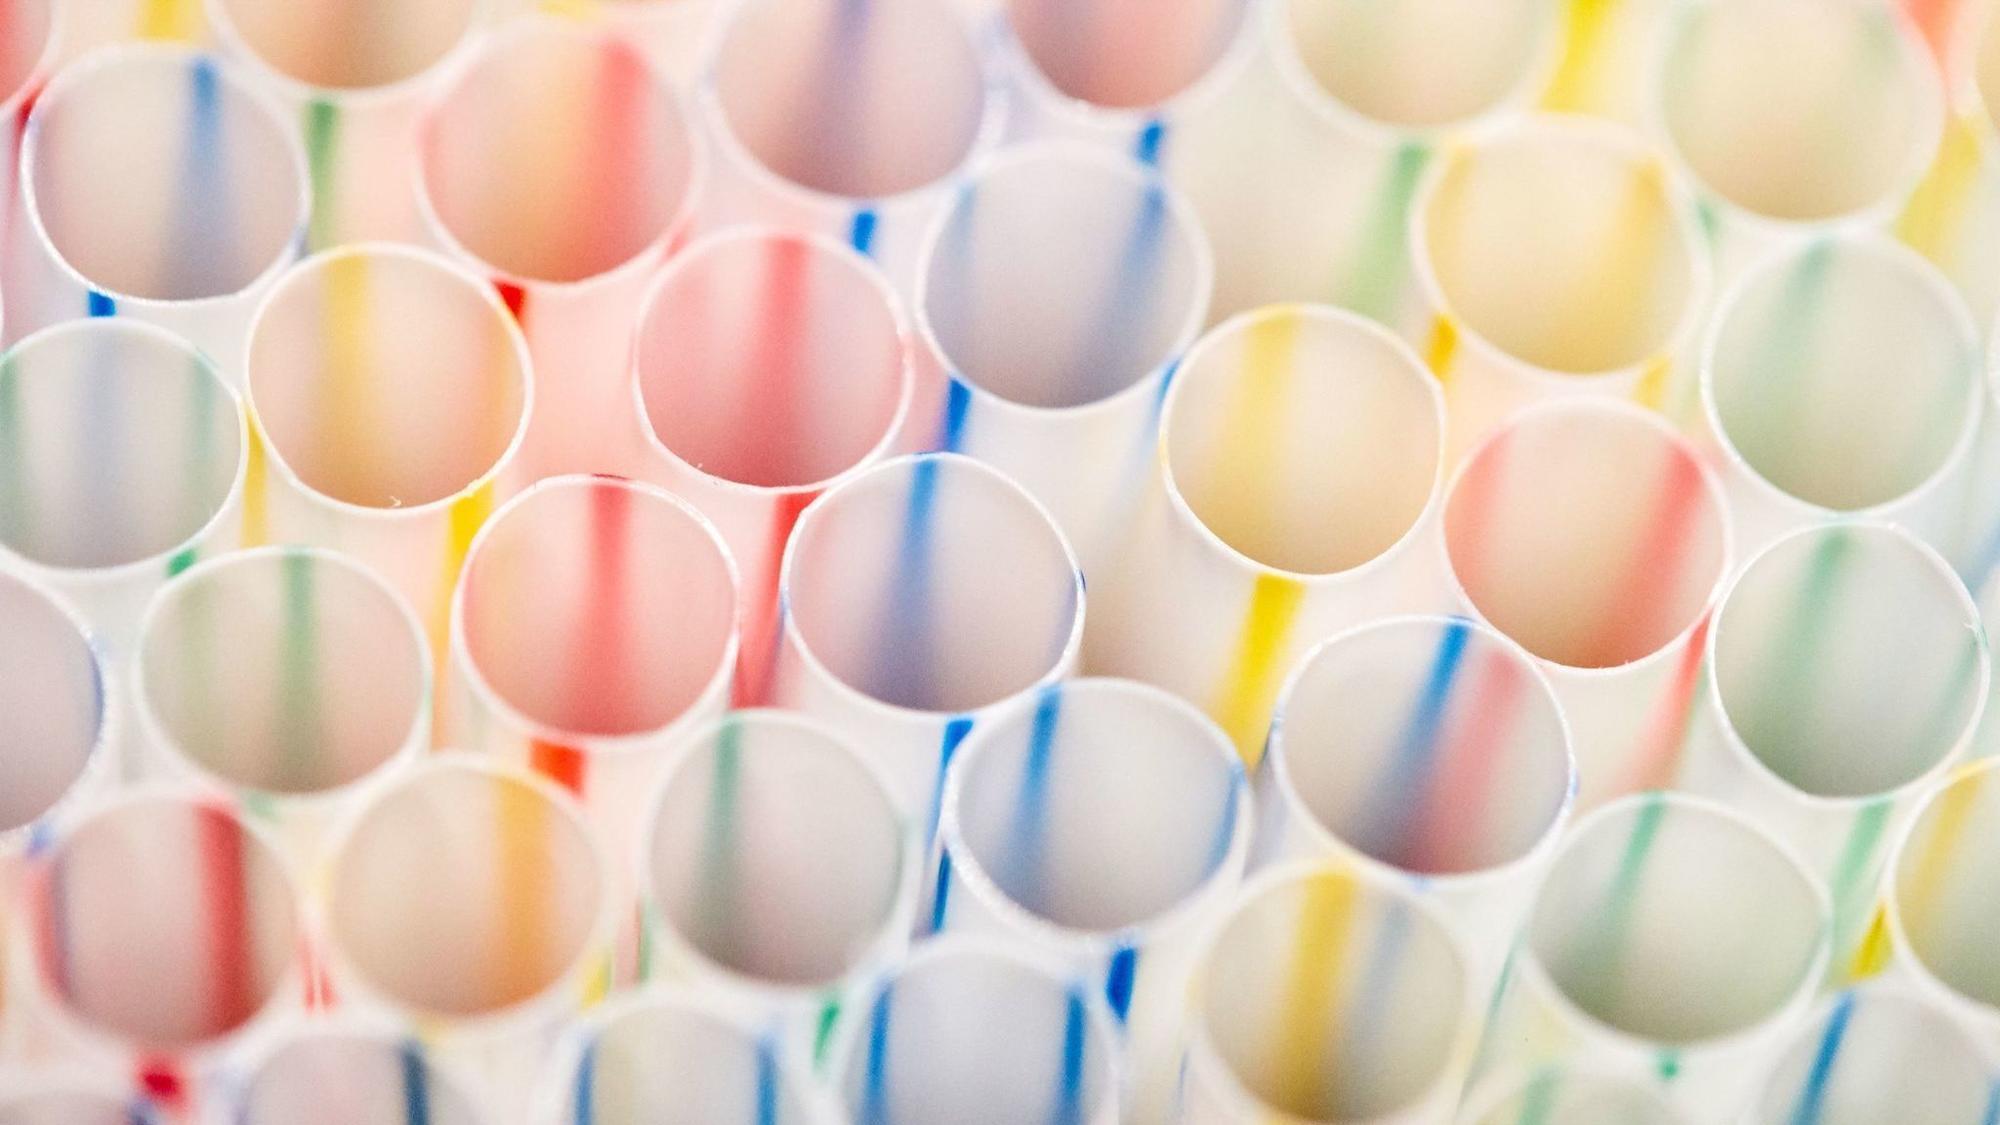 Trendy Bans On Plastic Straws Are Mostly Bunk